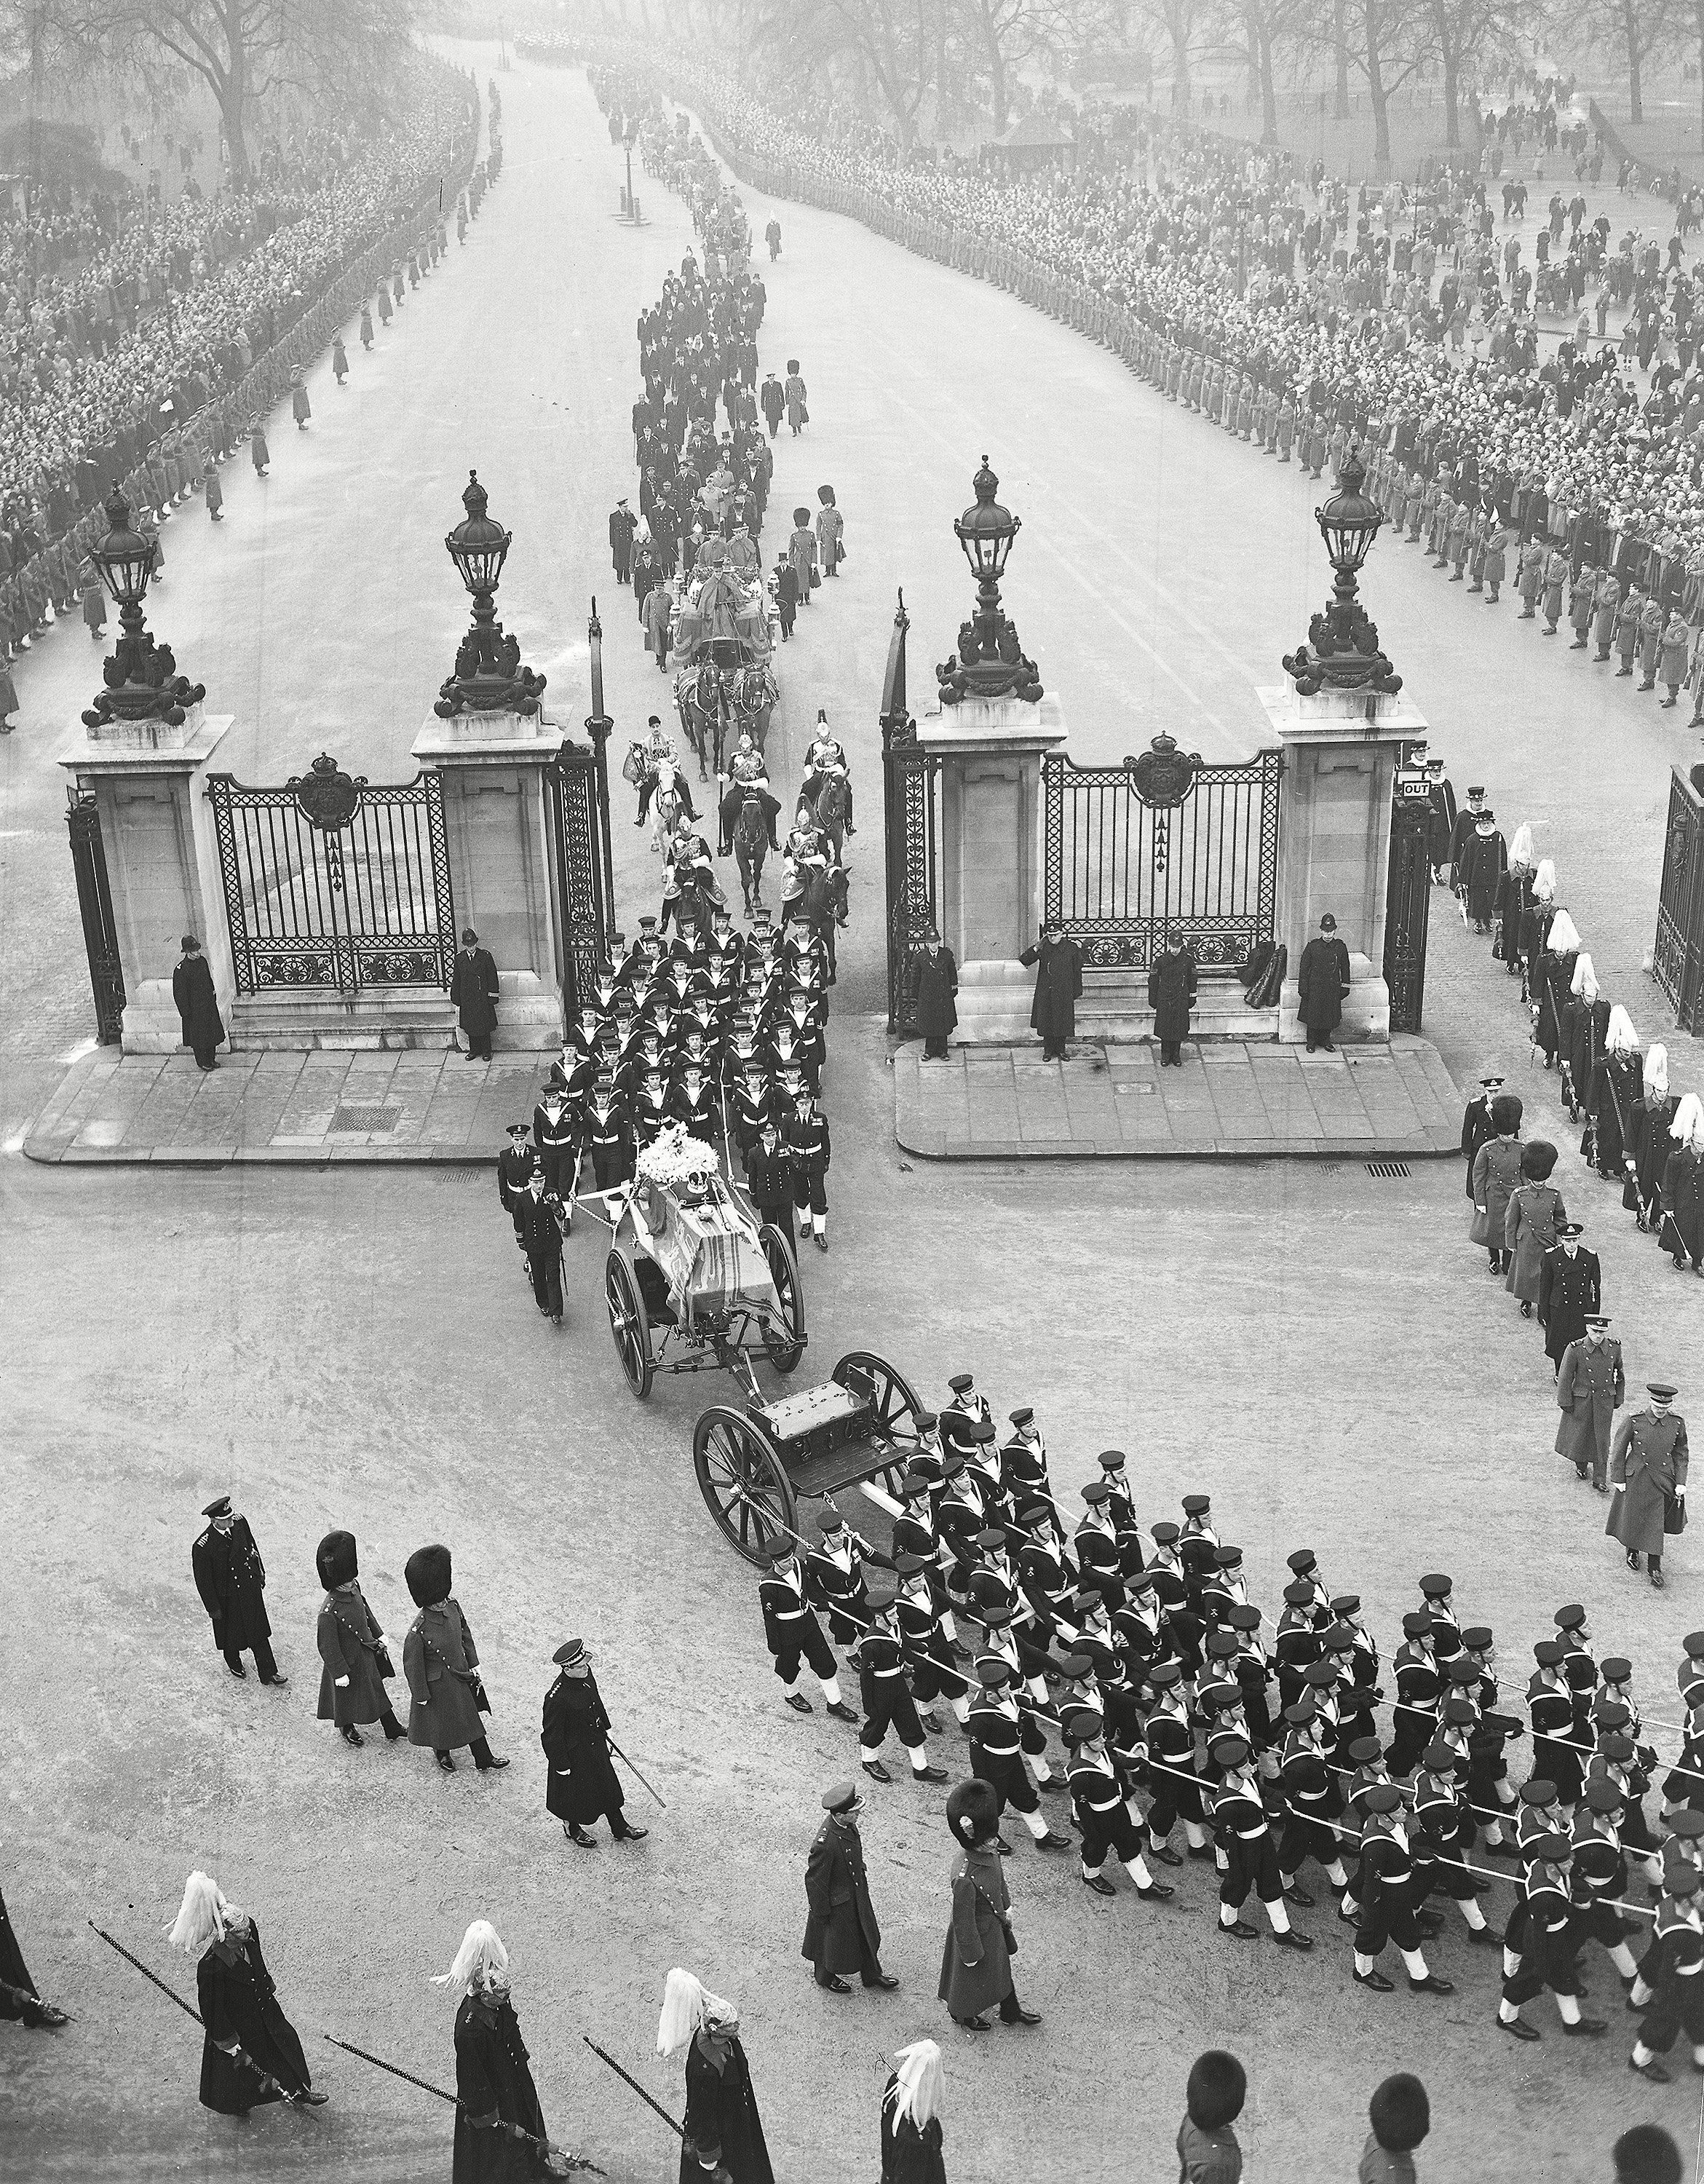 <p>Naval ratings drew the gun carriage bearing the coffin of Britain's King George VI -- who died on Feb. 6, 1952 and was buried on Feb. 15, 1952 -- from London's Hyde Park as the funeral procession approached Marble Arch en route to Paddington Station to take his body to Windsor for burial. The coach following behind carried Queen Elizabeth II, Queen Elizabeth the Queen Mother, Princess Margaret and the king's sister, Princess Mary.</p>